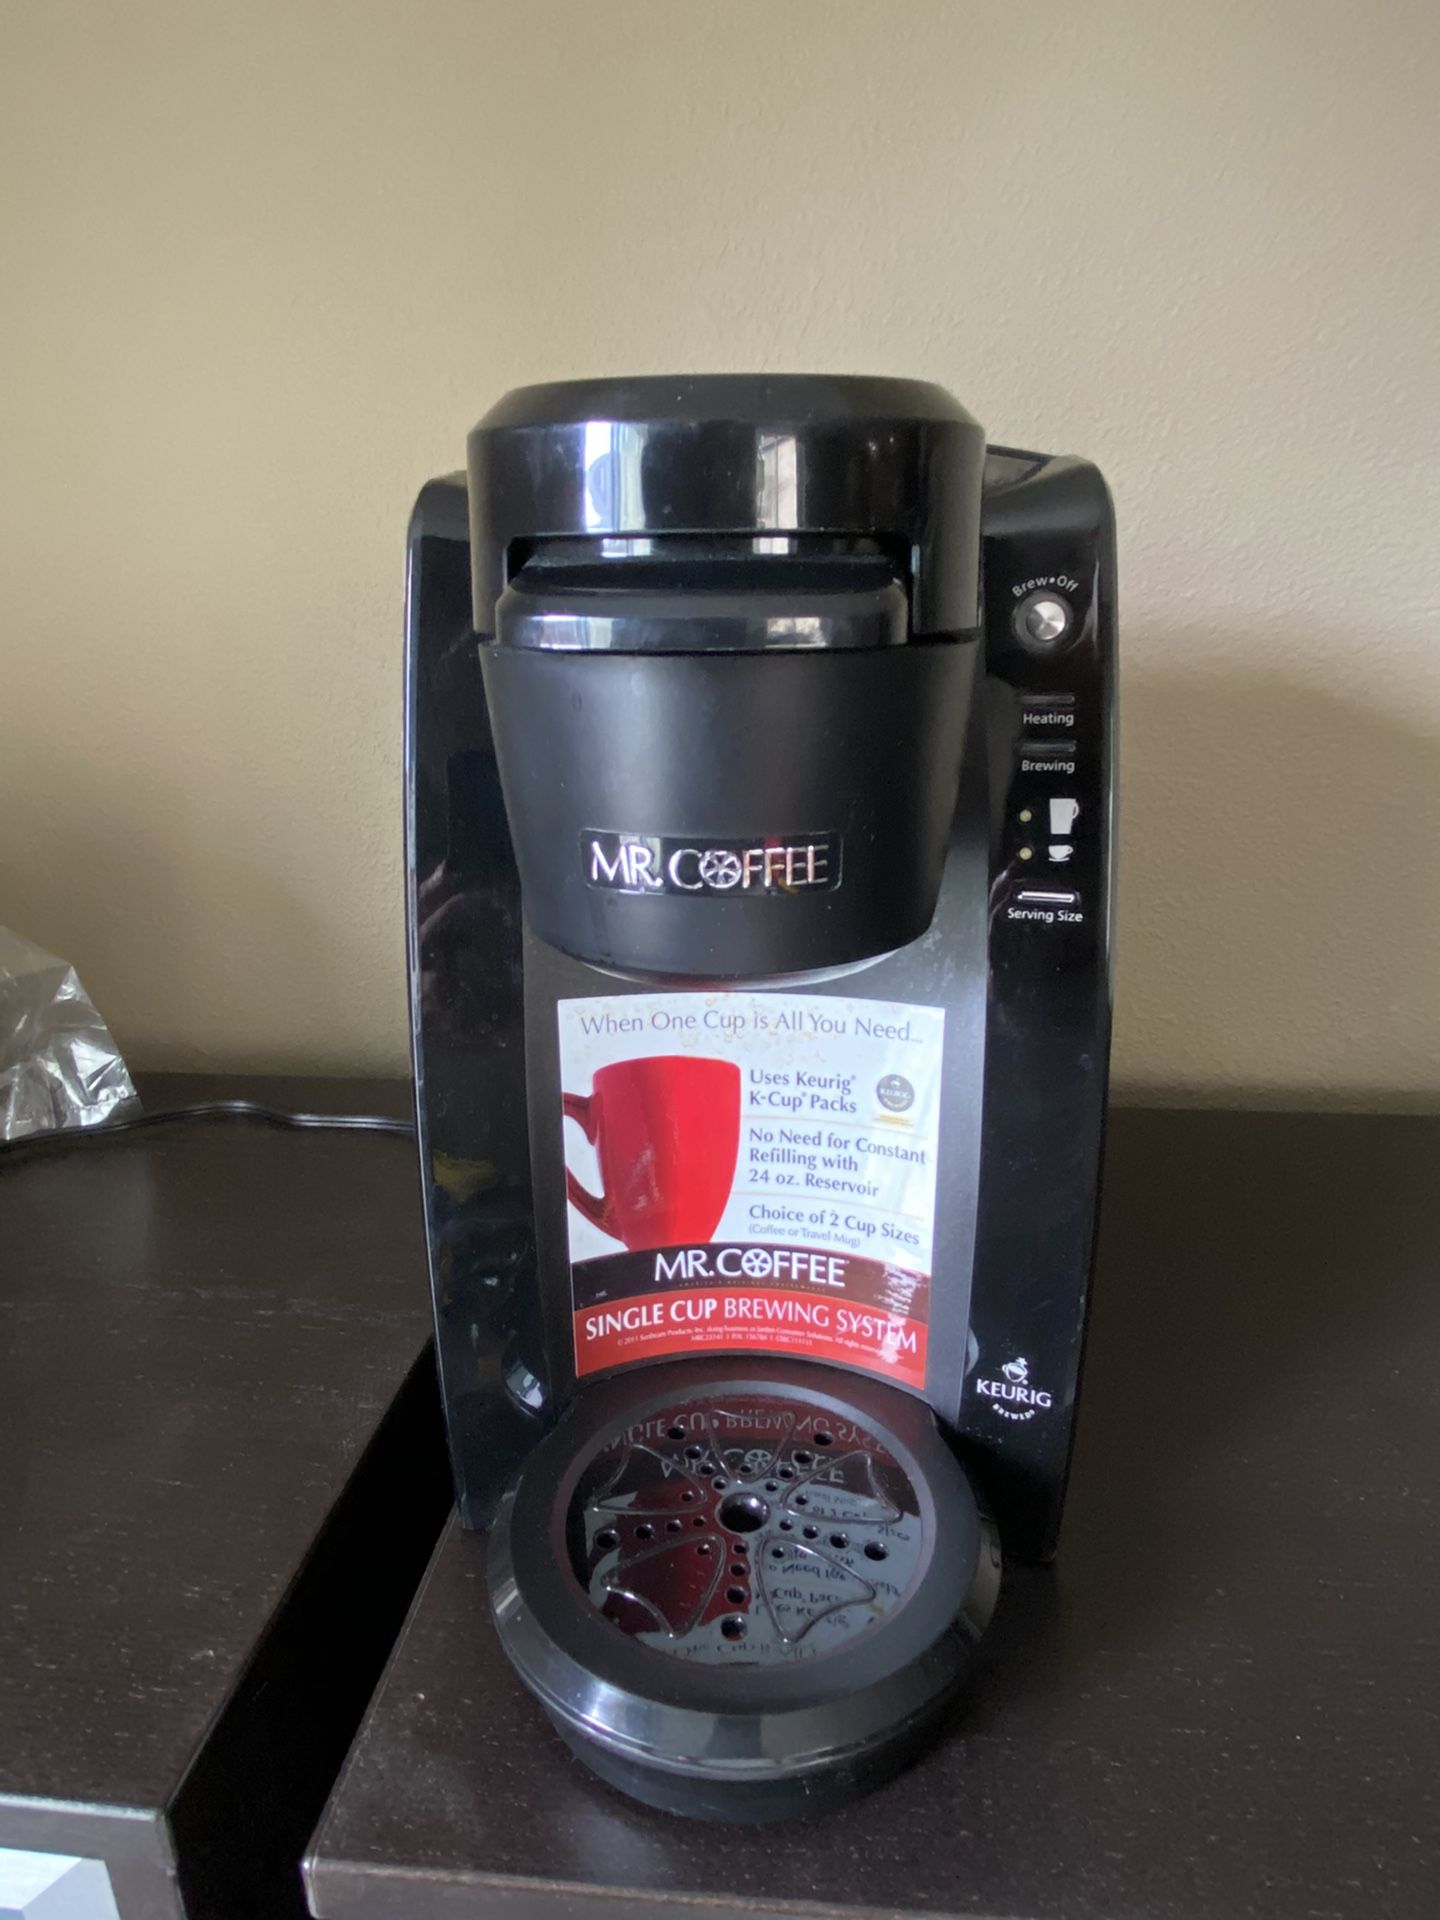 MR. COFFEE single cup brewing system (works with Keurig capsules)